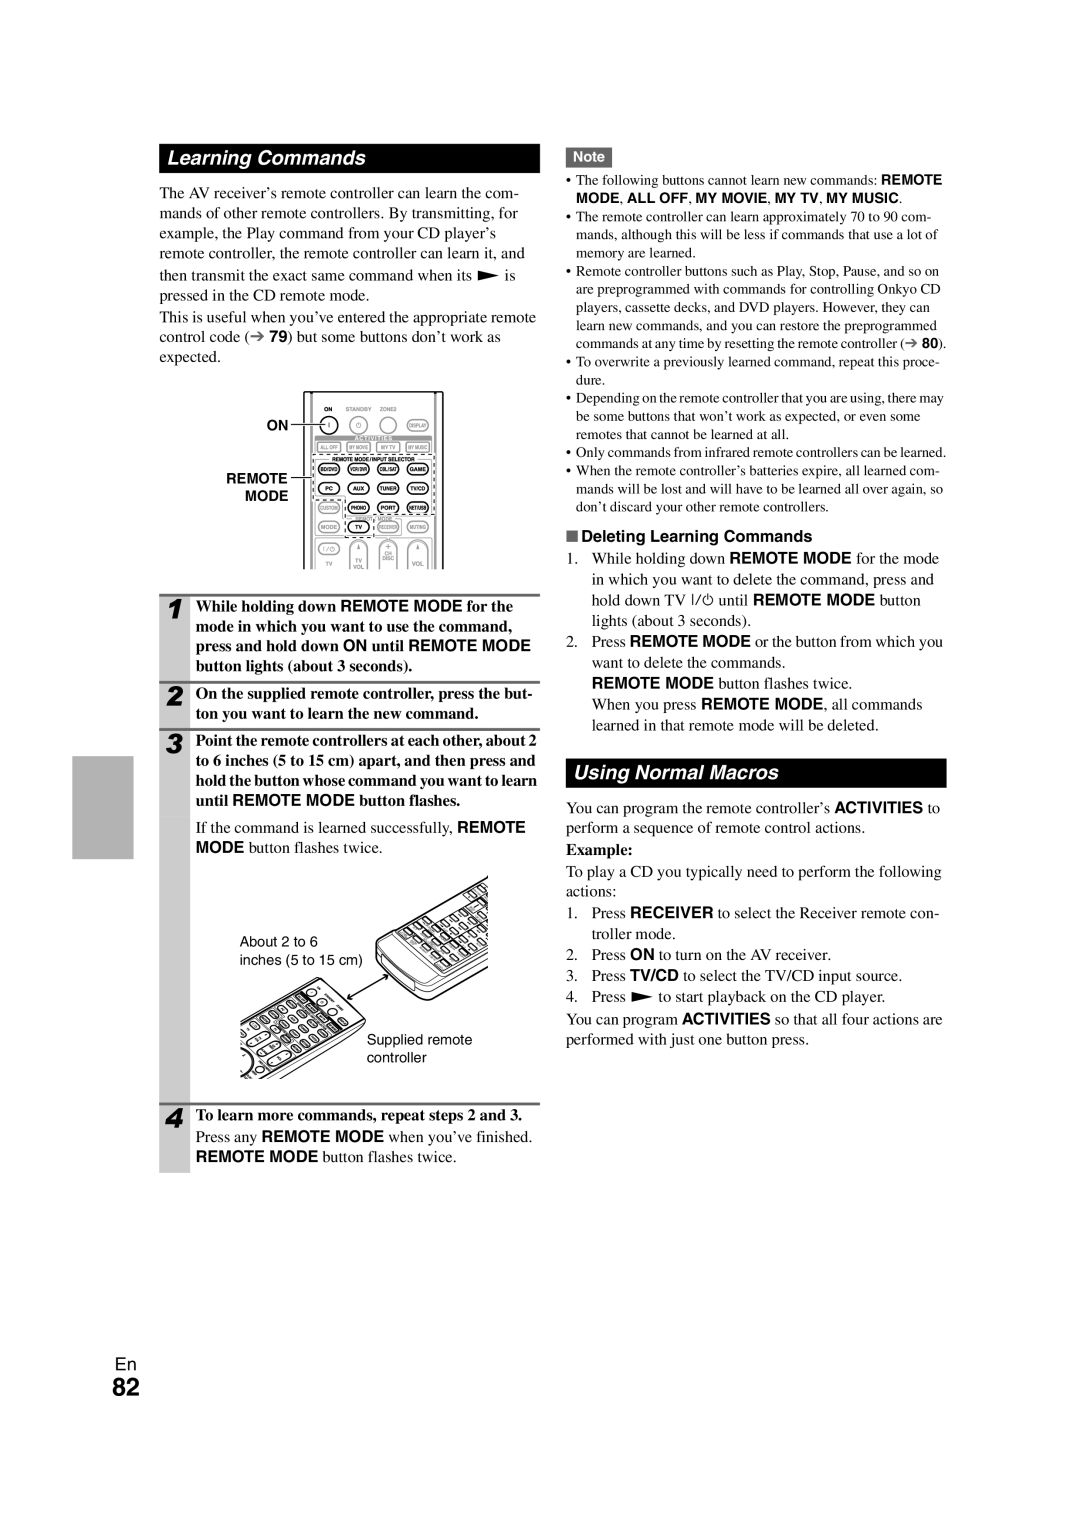 Onkyo TX-NR708 instruction manual Using Normal Macros, Deleting Learning Commands 